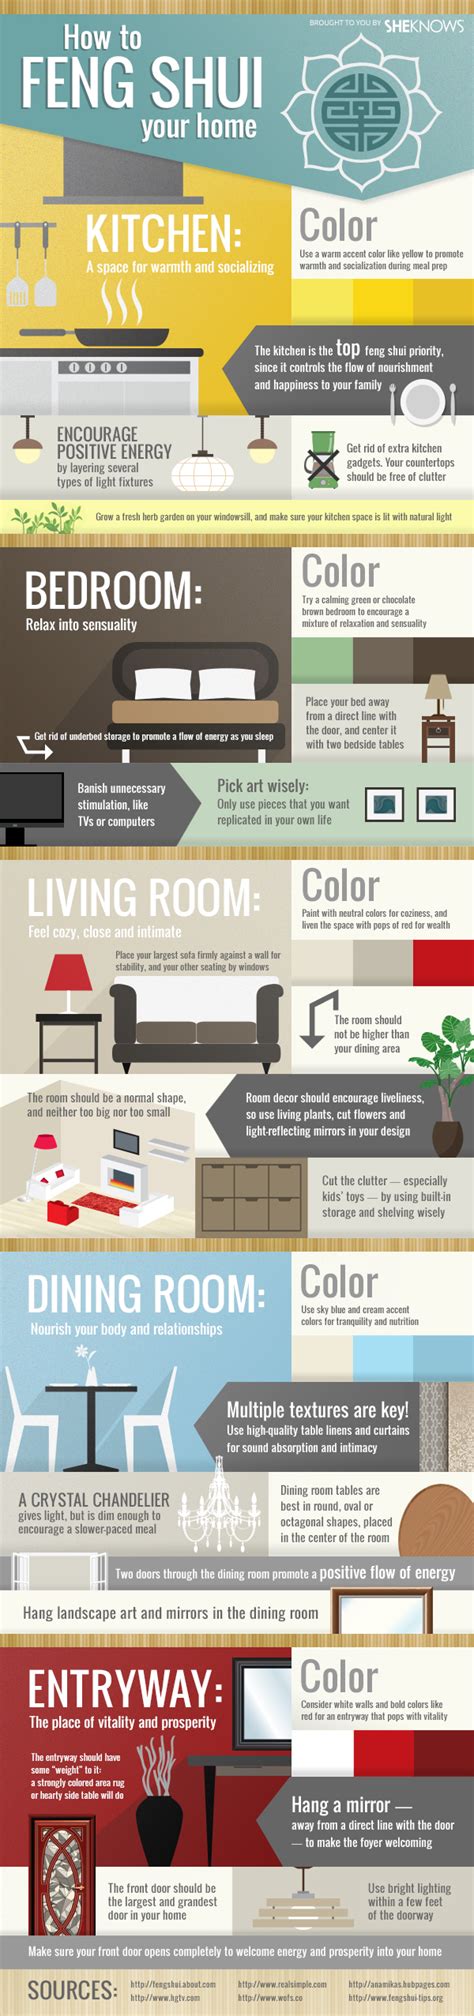 How To Feng Shui Your Home A Room By Room Guide Sheknows